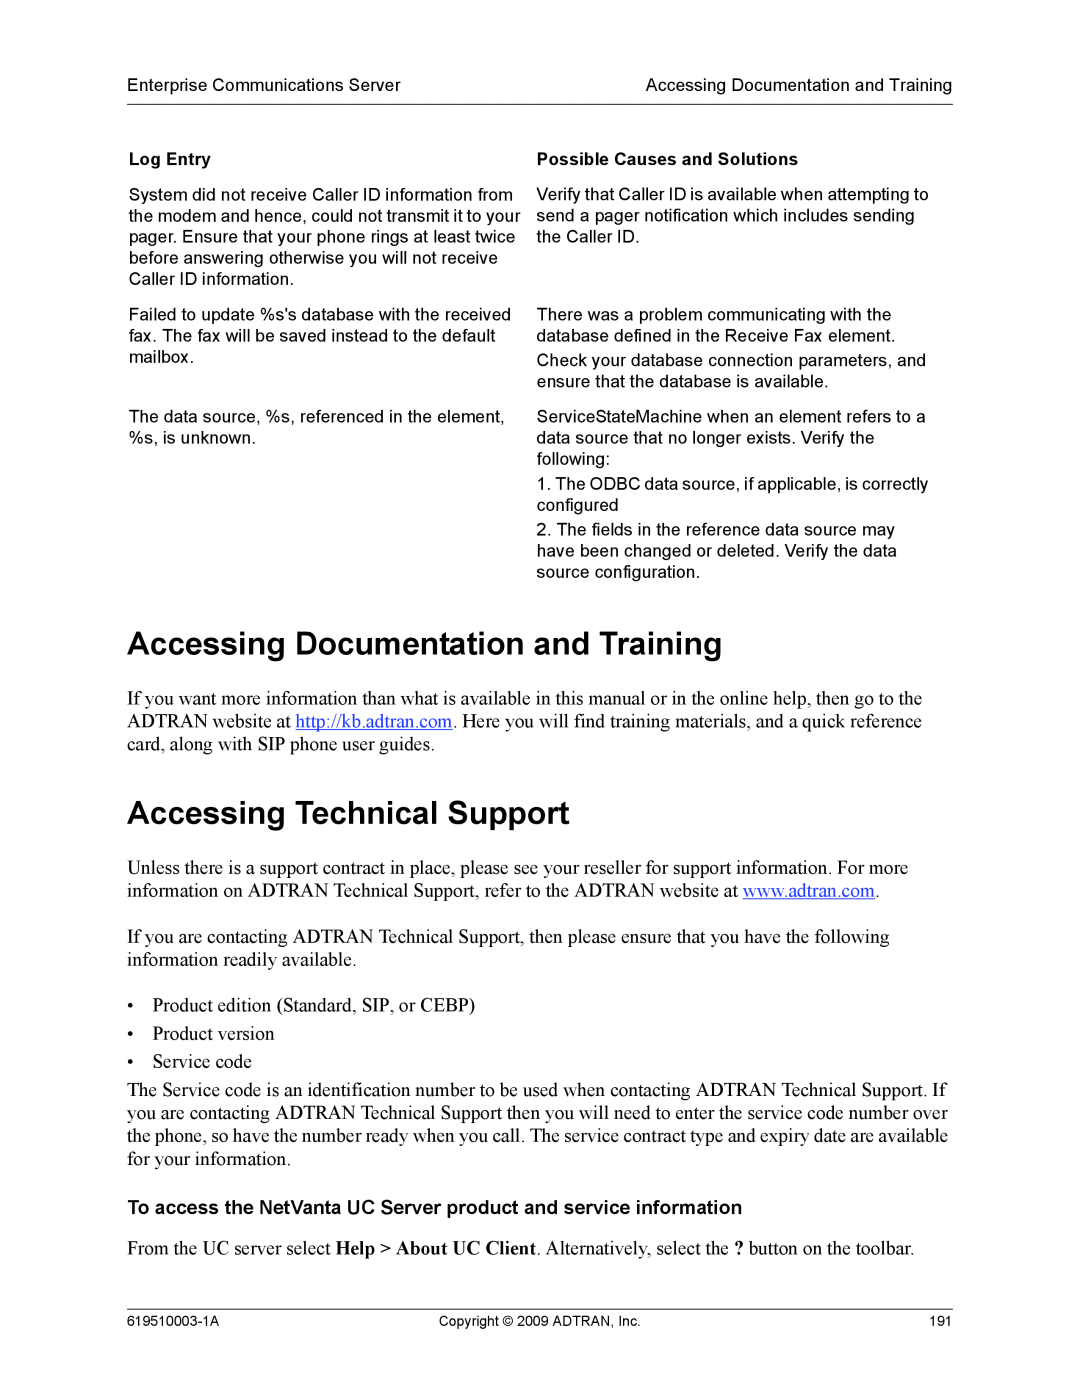 ADTRAN 619510003-1A manual Accessing Documentation and Training, Accessing Technical Support 